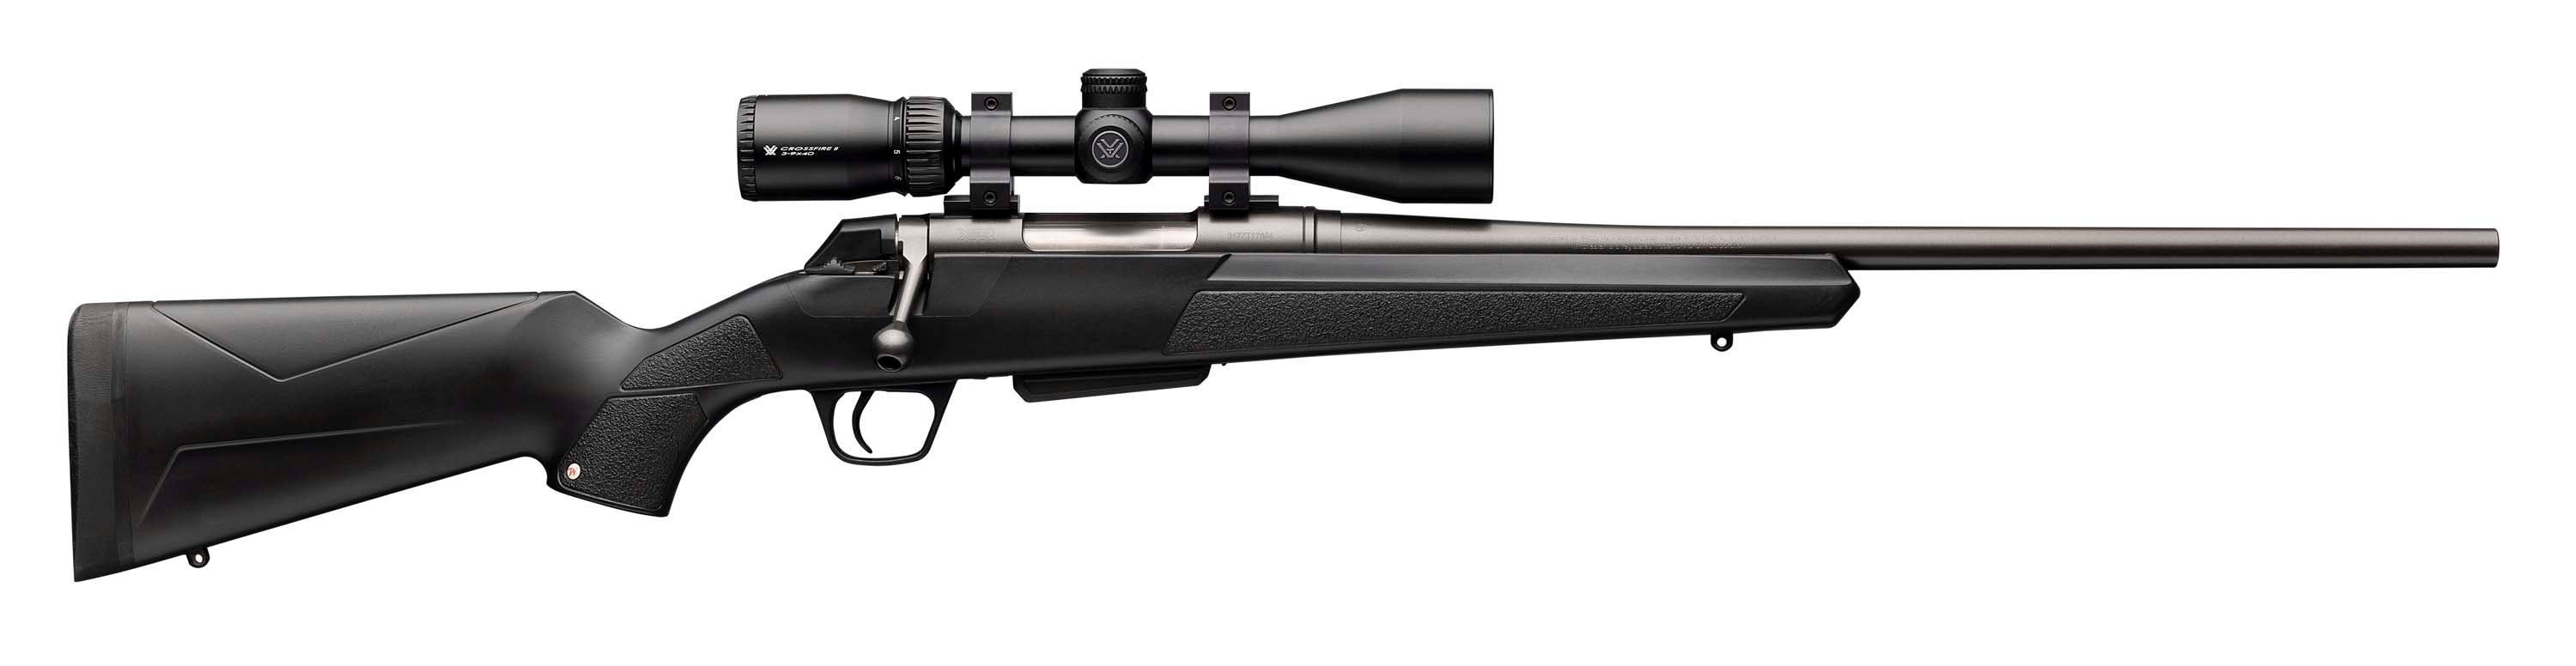 xpr-compact-scope-combo-rifle-535737212-1